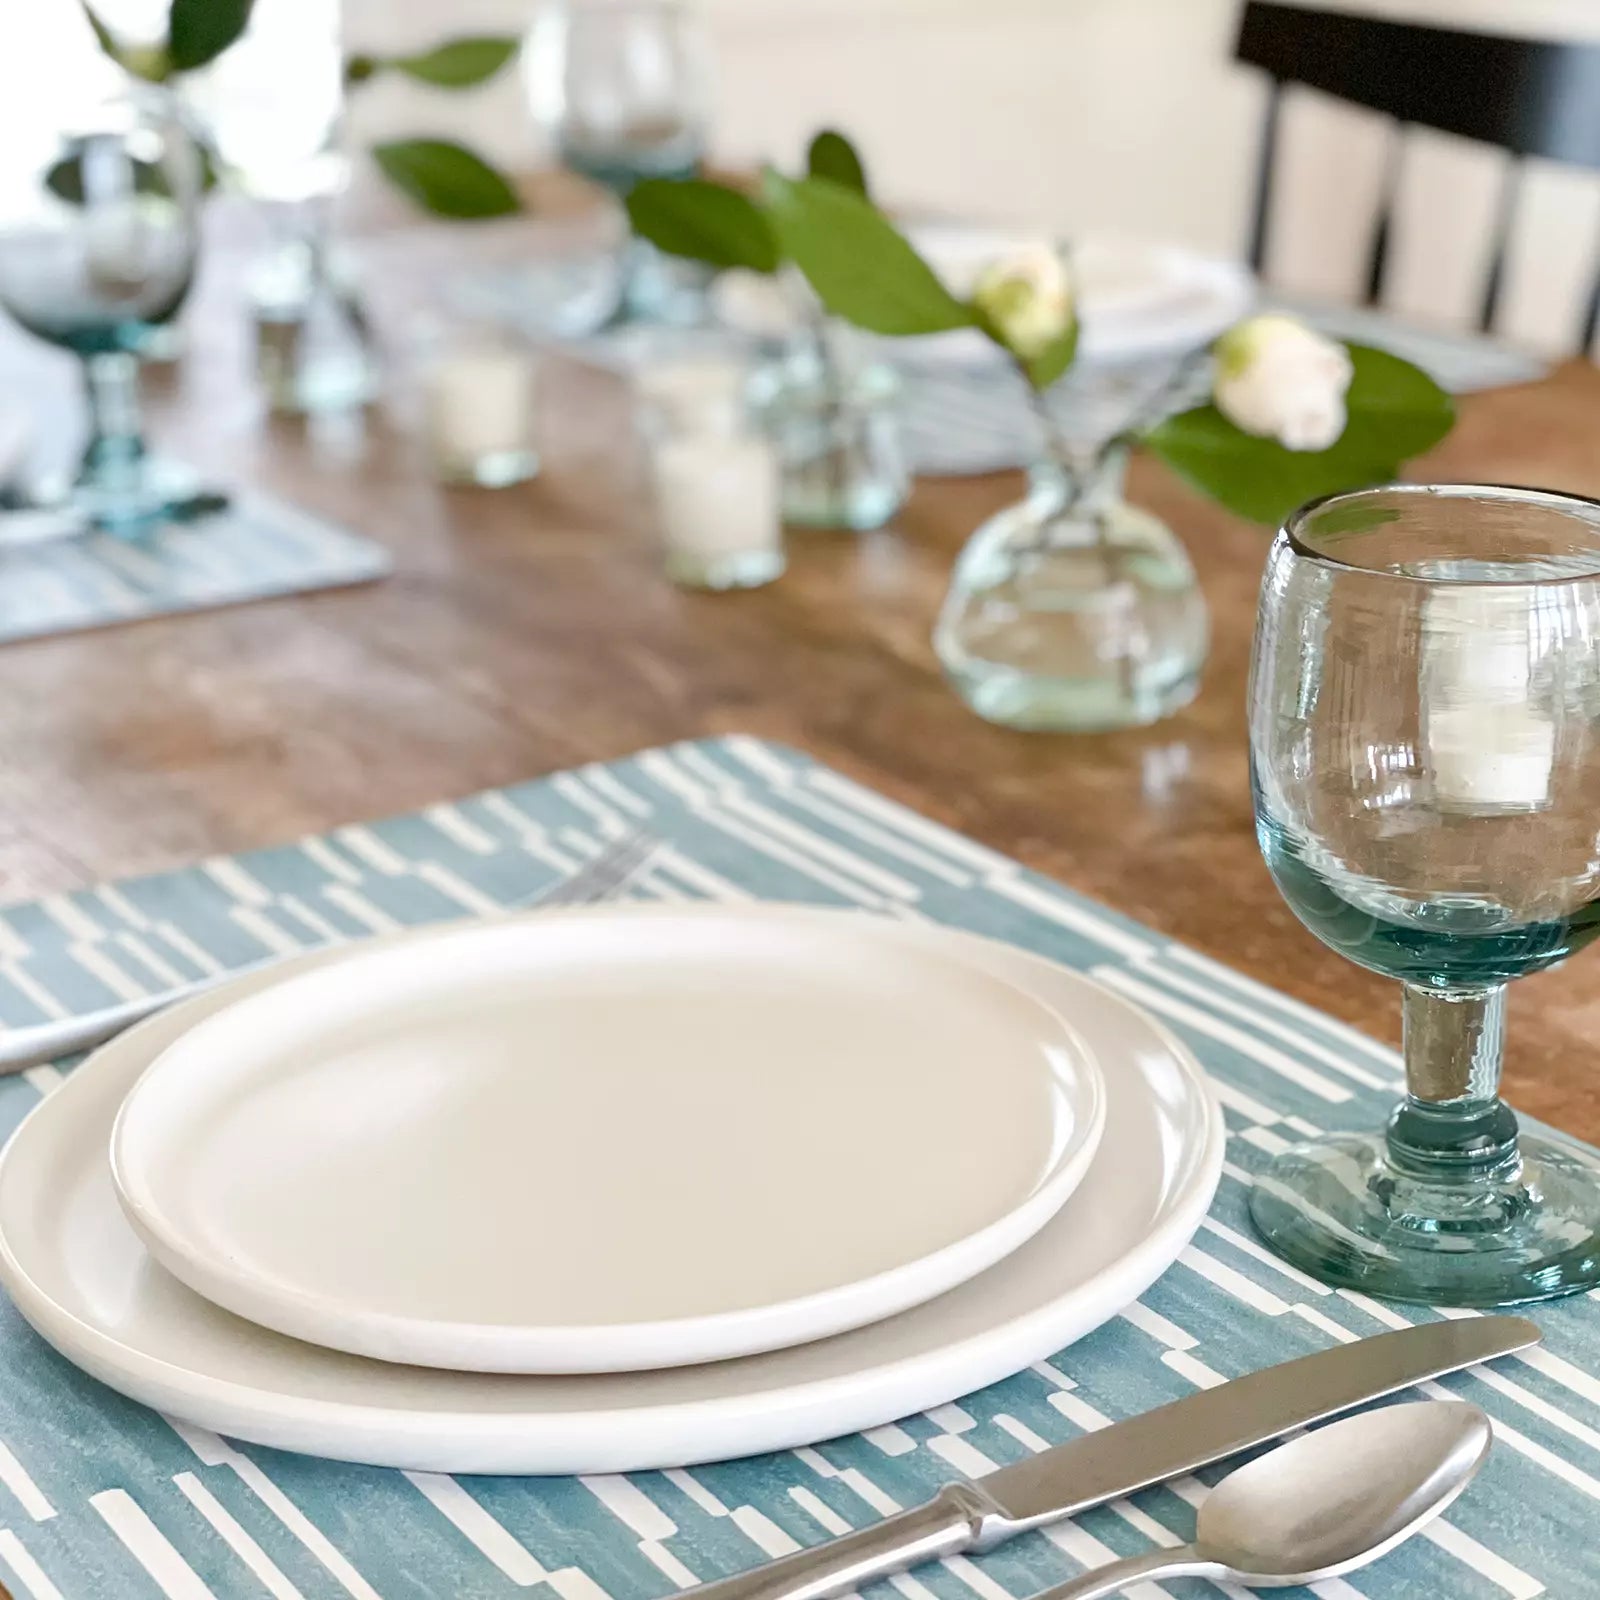 Nara Turquoise Blue Striped place mat with plate, napkin and silverware